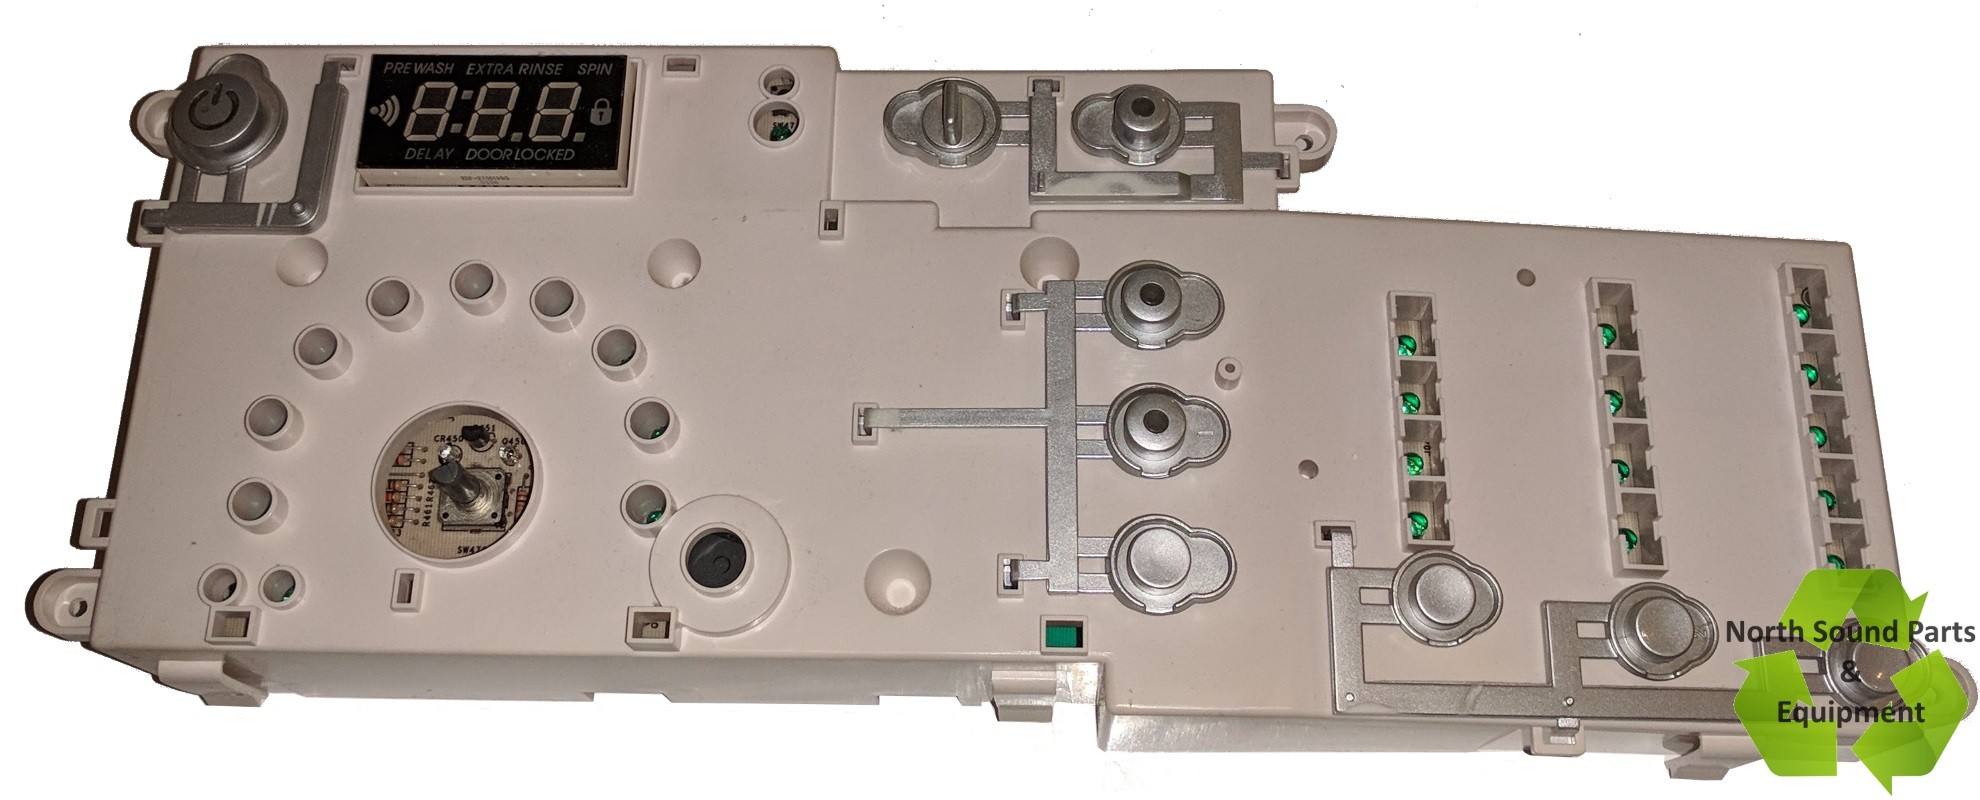 GE Washer Control Board - WH12X10303, WH12X10355 (NSPE)